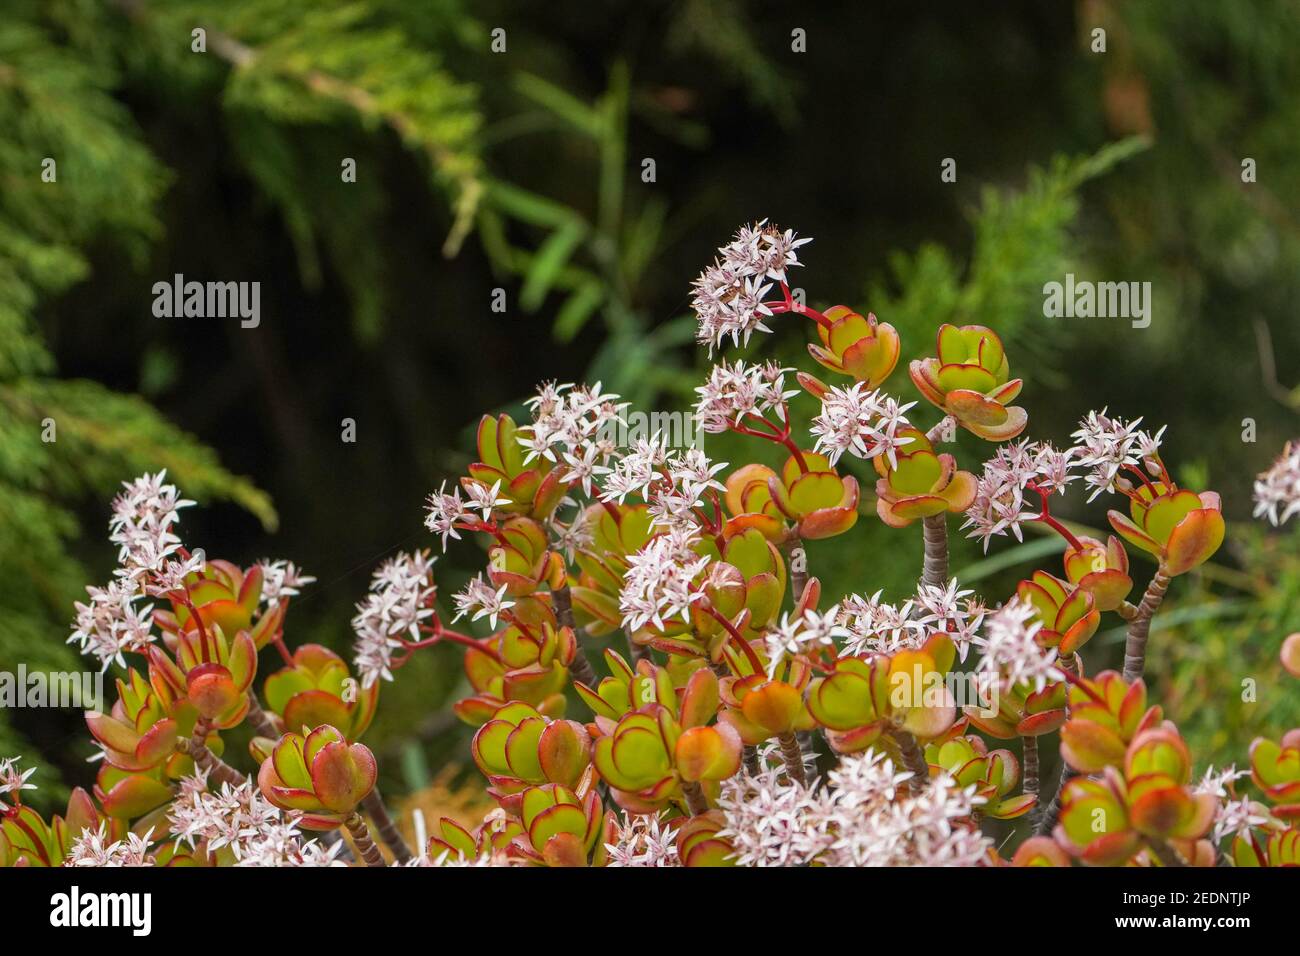 Flowers of Jade plant, Crassula ovata, succulent plant growing in a garden. Spain. Stock Photo